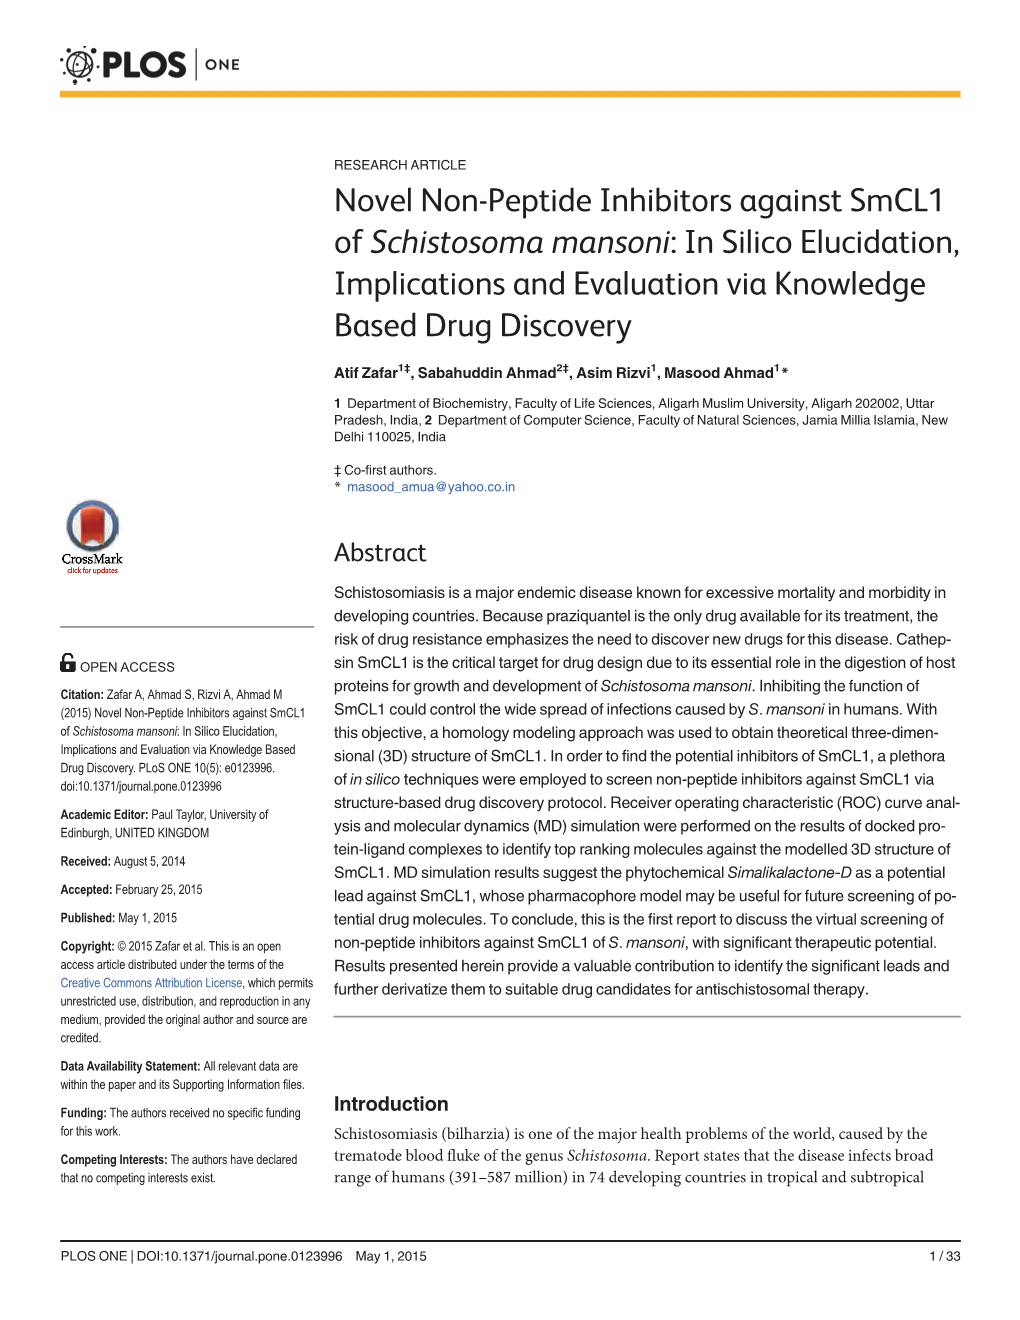 Novel Non-Peptide Inhibitors Against Smcl1 of Schistosoma Mansoni: in Silico Elucidation, Implications and Evaluation Via Knowledge Based Drug Discovery